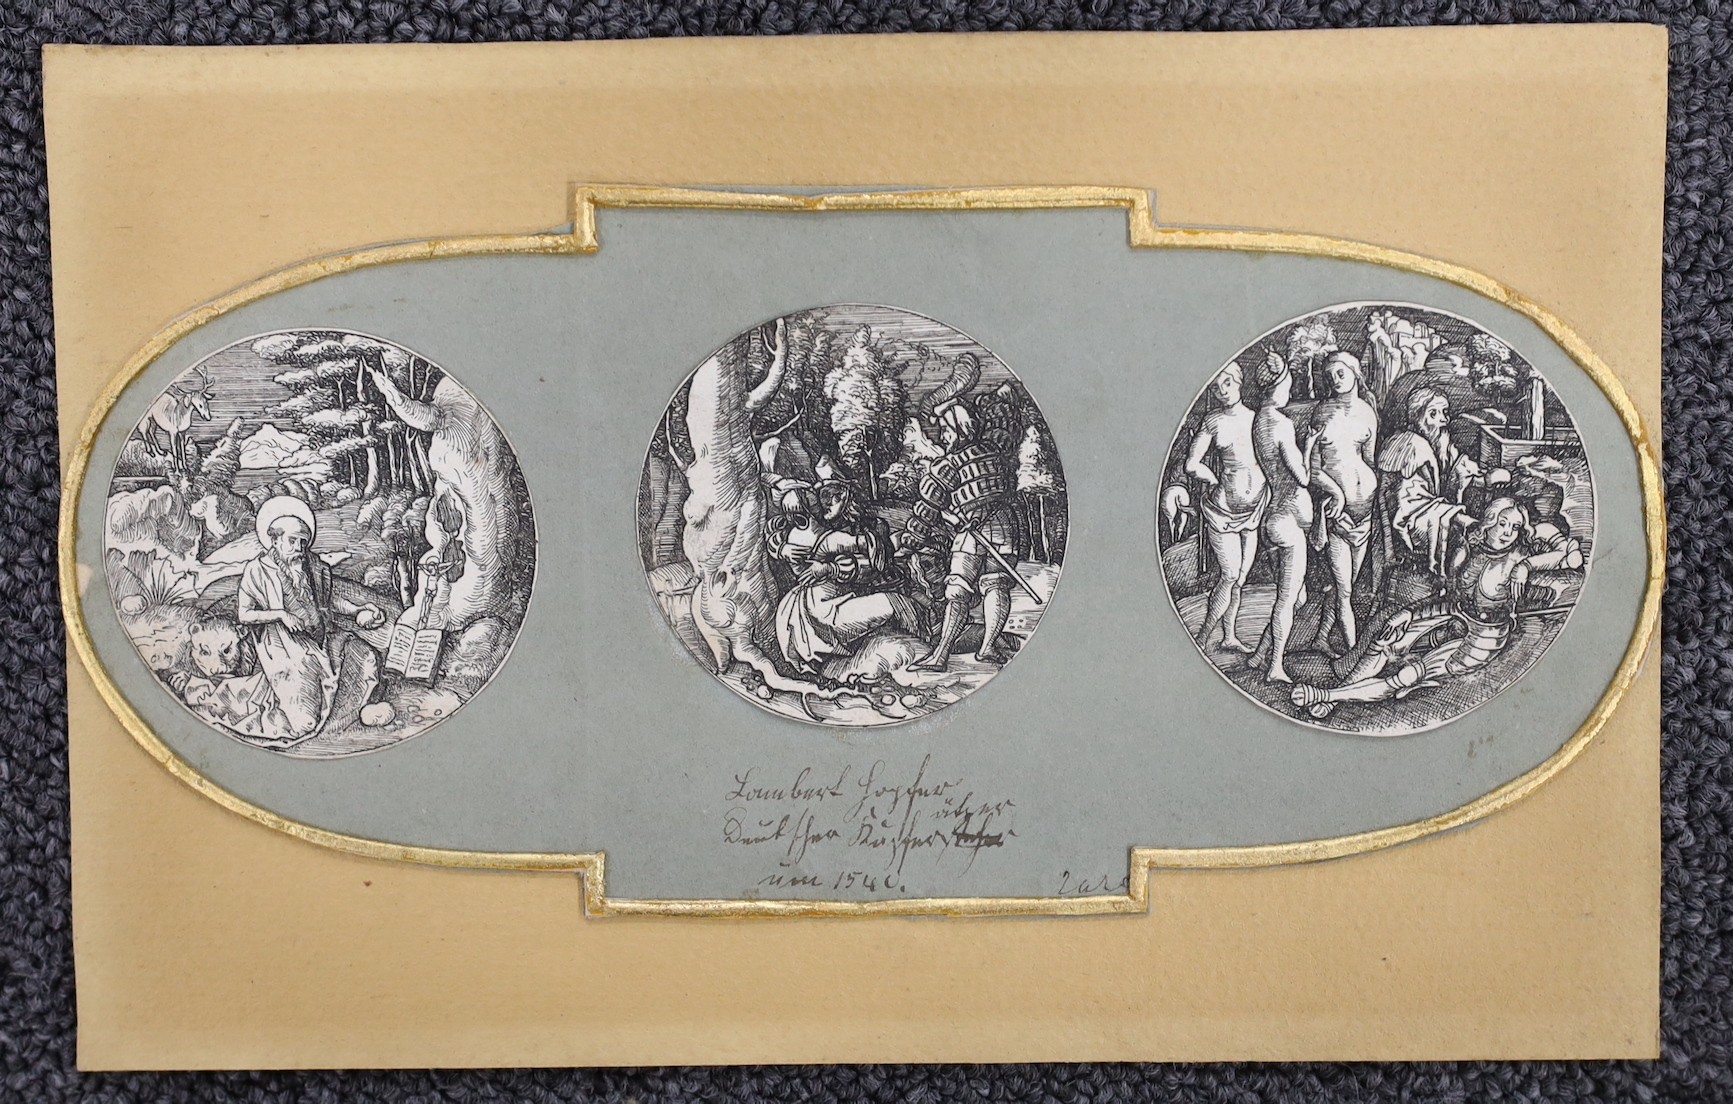 After Durer by Lambert Hopfer. Three engravings in shaped mount; Two couples in landscape, Judgement of Paris and St Jerome praying, B135/134, tondo, 5.5cm, unframed.